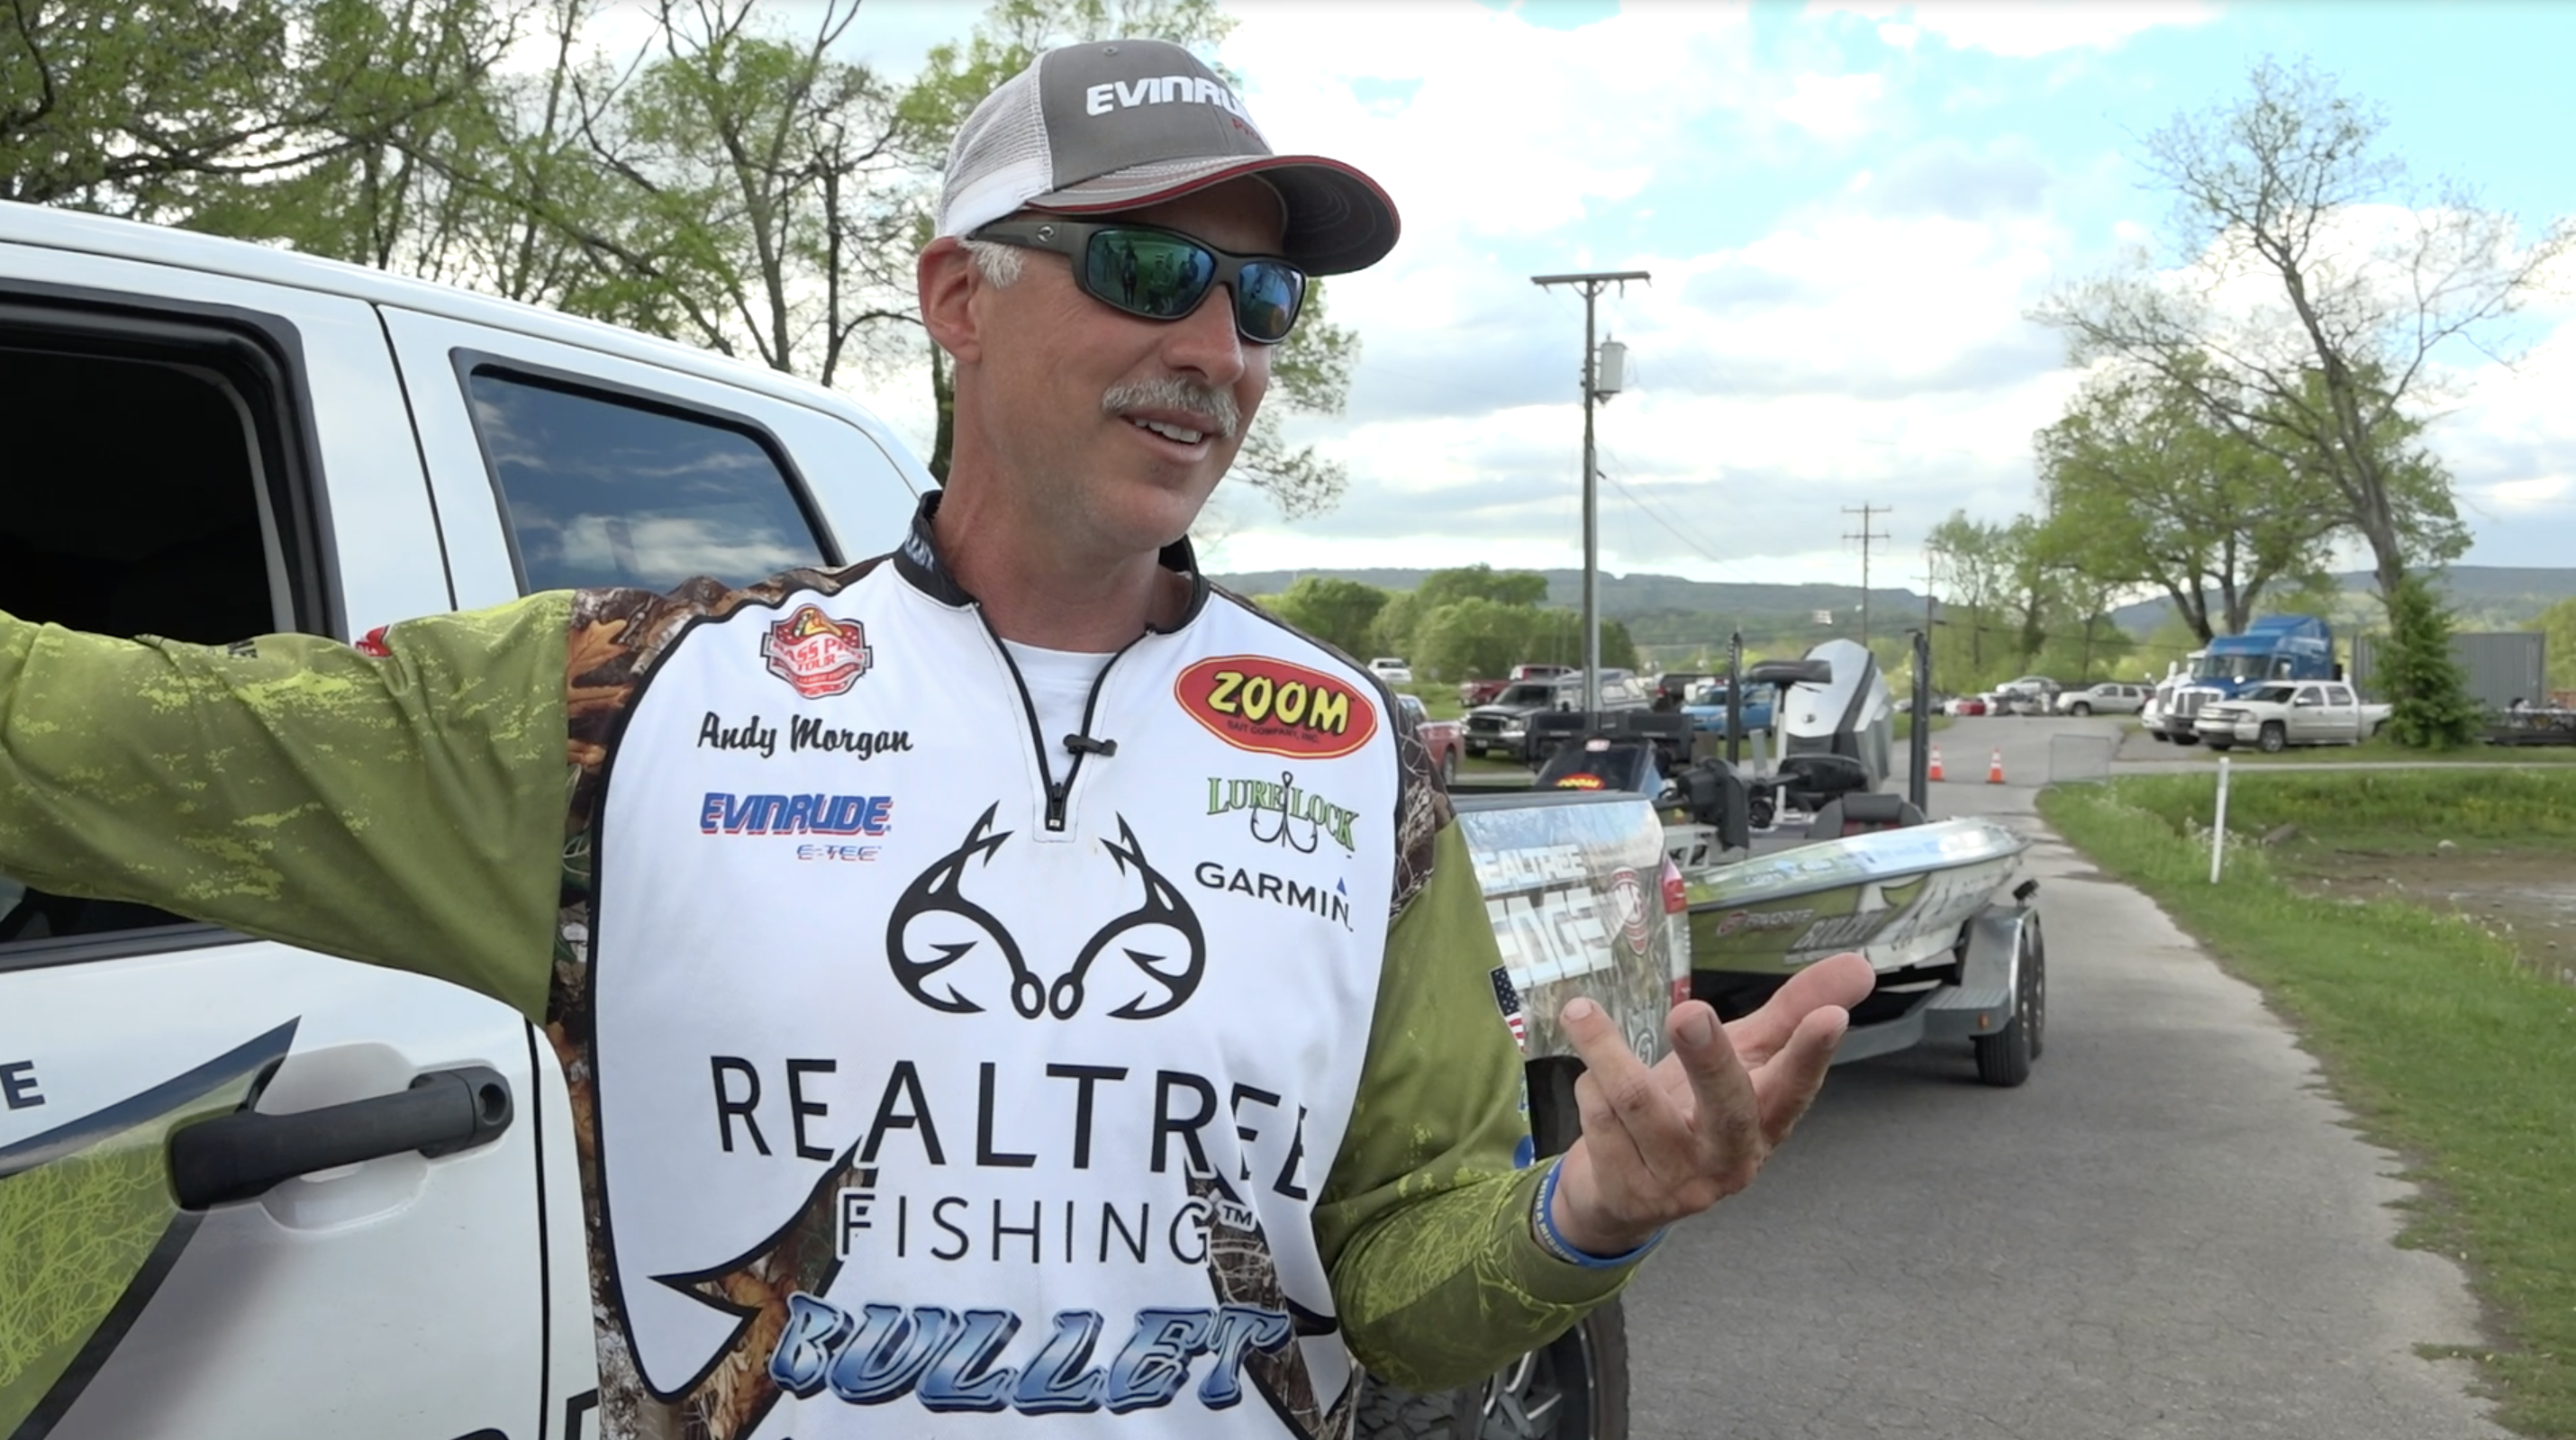 Top Four of Stage Four - Major League Fishing